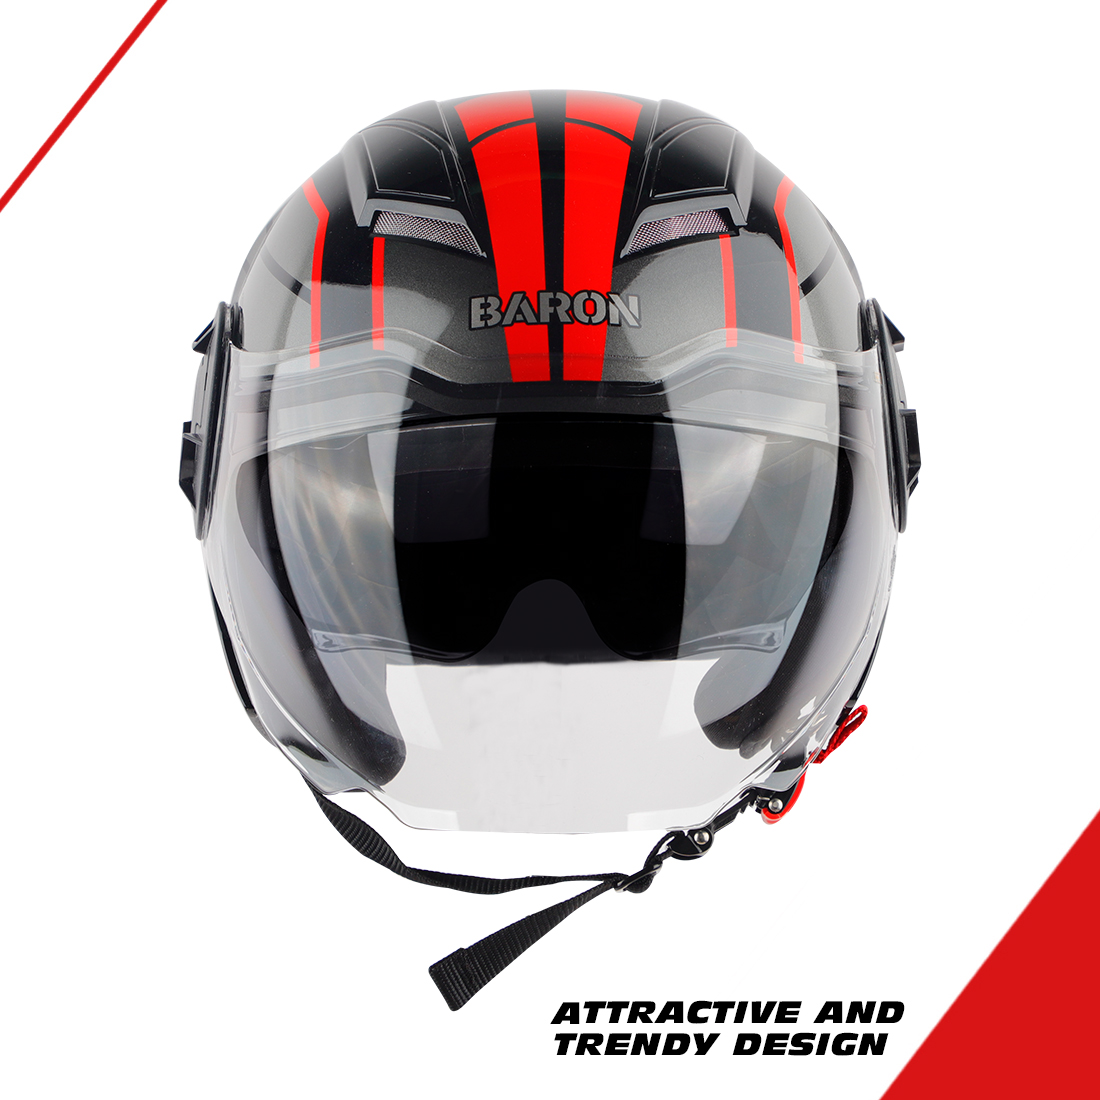 Steelbird SBH-31 Baron 24 ISI Certified Open Face Helmet For Men And Women With Inner Sun Shield(Dual Visor Mechanism) (Glossy Black Red)